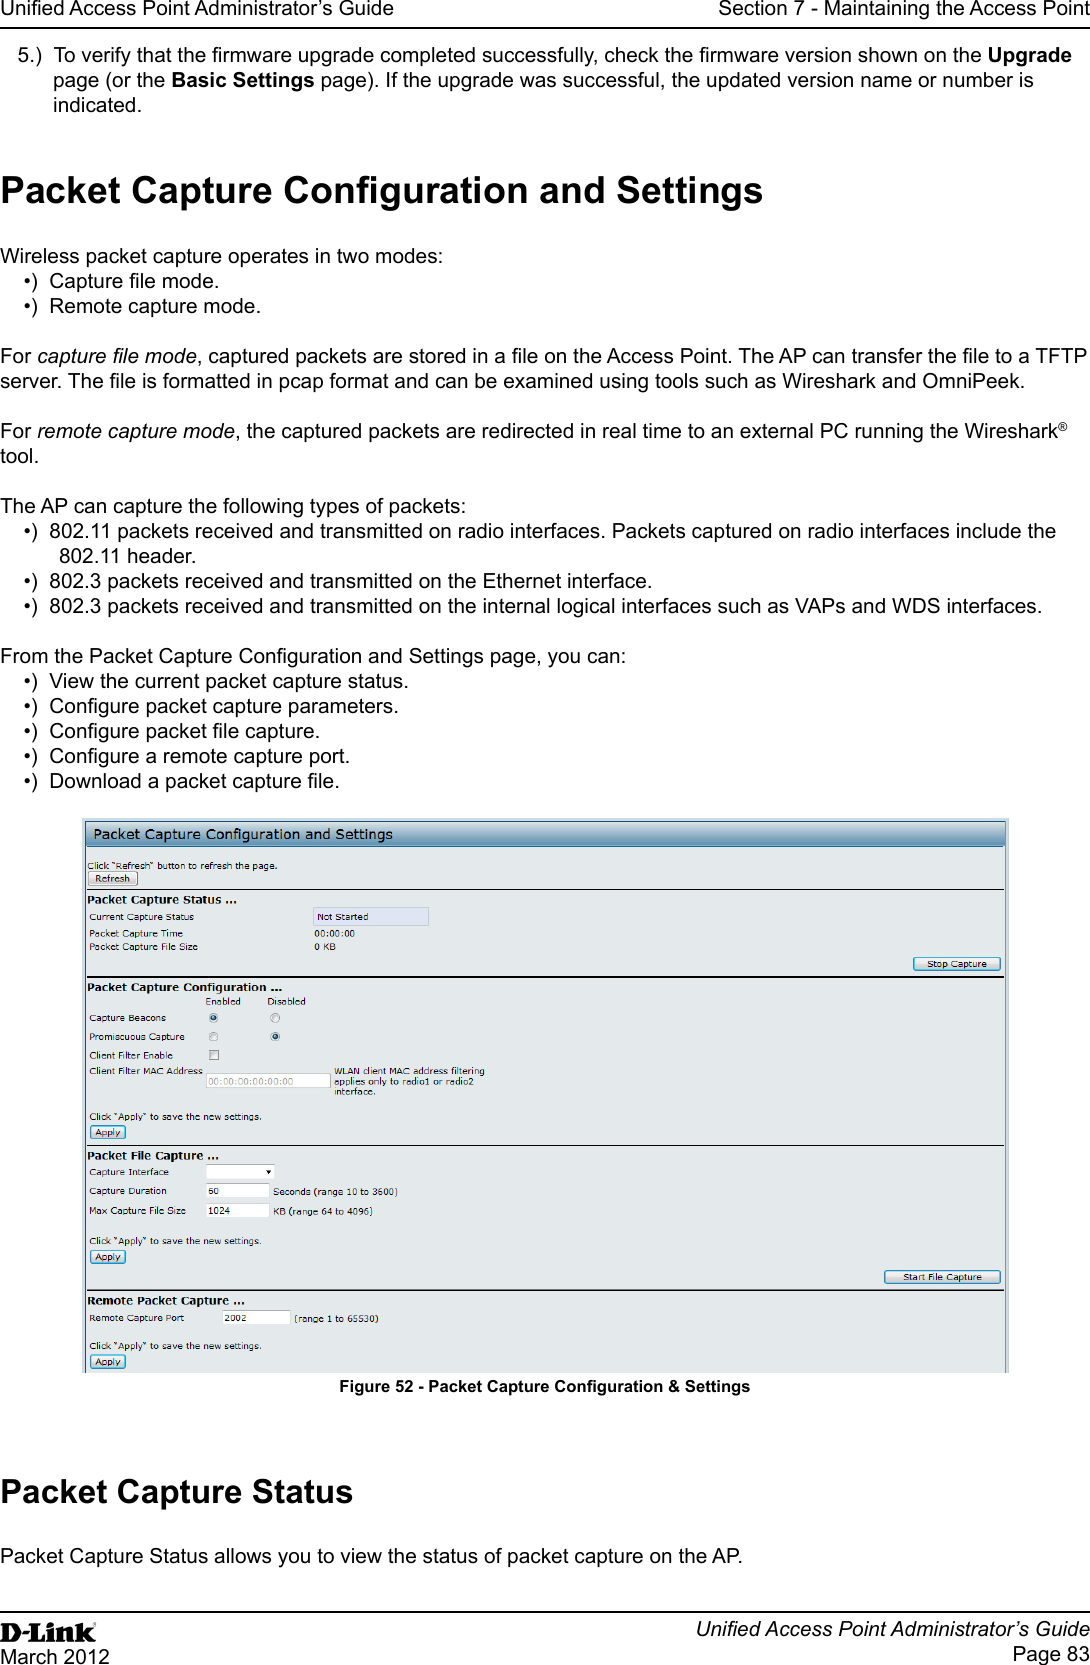 Unied Access Point Administrator’s GuideUnied Access Point Administrator’s GuidePage 83March 2012Section 7 - Maintaining the Access Point5.)  To verify that the rmware upgrade completed successfully, check the rmware version shown on the Upgrade page (or the Basic Settings page). If the upgrade was successful, the updated version name or number is indicated.Packet Capture Conguration and SettingsWireless packet capture operates in two modes:•)  Capture le mode.•)  Remote capture mode.For capture le mode, captured packets are stored in a le on the Access Point. The AP can transfer the le to a TFTP server. The le is formatted in pcap format and can be examined using tools such as Wireshark and OmniPeek.For remote capture mode, the captured packets are redirected in real time to an external PC running the Wireshark® tool.The AP can capture the following types of packets:•)  802.11 packets received and transmitted on radio interfaces. Packets captured on radio interfaces include the 802.11 header.•)  802.3 packets received and transmitted on the Ethernet interface.•)  802.3 packets received and transmitted on the internal logical interfaces such as VAPs and WDS interfaces.From the Packet Capture Conguration and Settings page, you can:•)  View the current packet capture status.•)  Congure packet capture parameters.•)  Congure packet le capture.•)  Congure a remote capture port.•)  Download a packet capture le.Figure 52 - Packet Capture Conguration &amp; SettingsPacket Capture StatusPacket Capture Status allows you to view the status of packet capture on the AP.